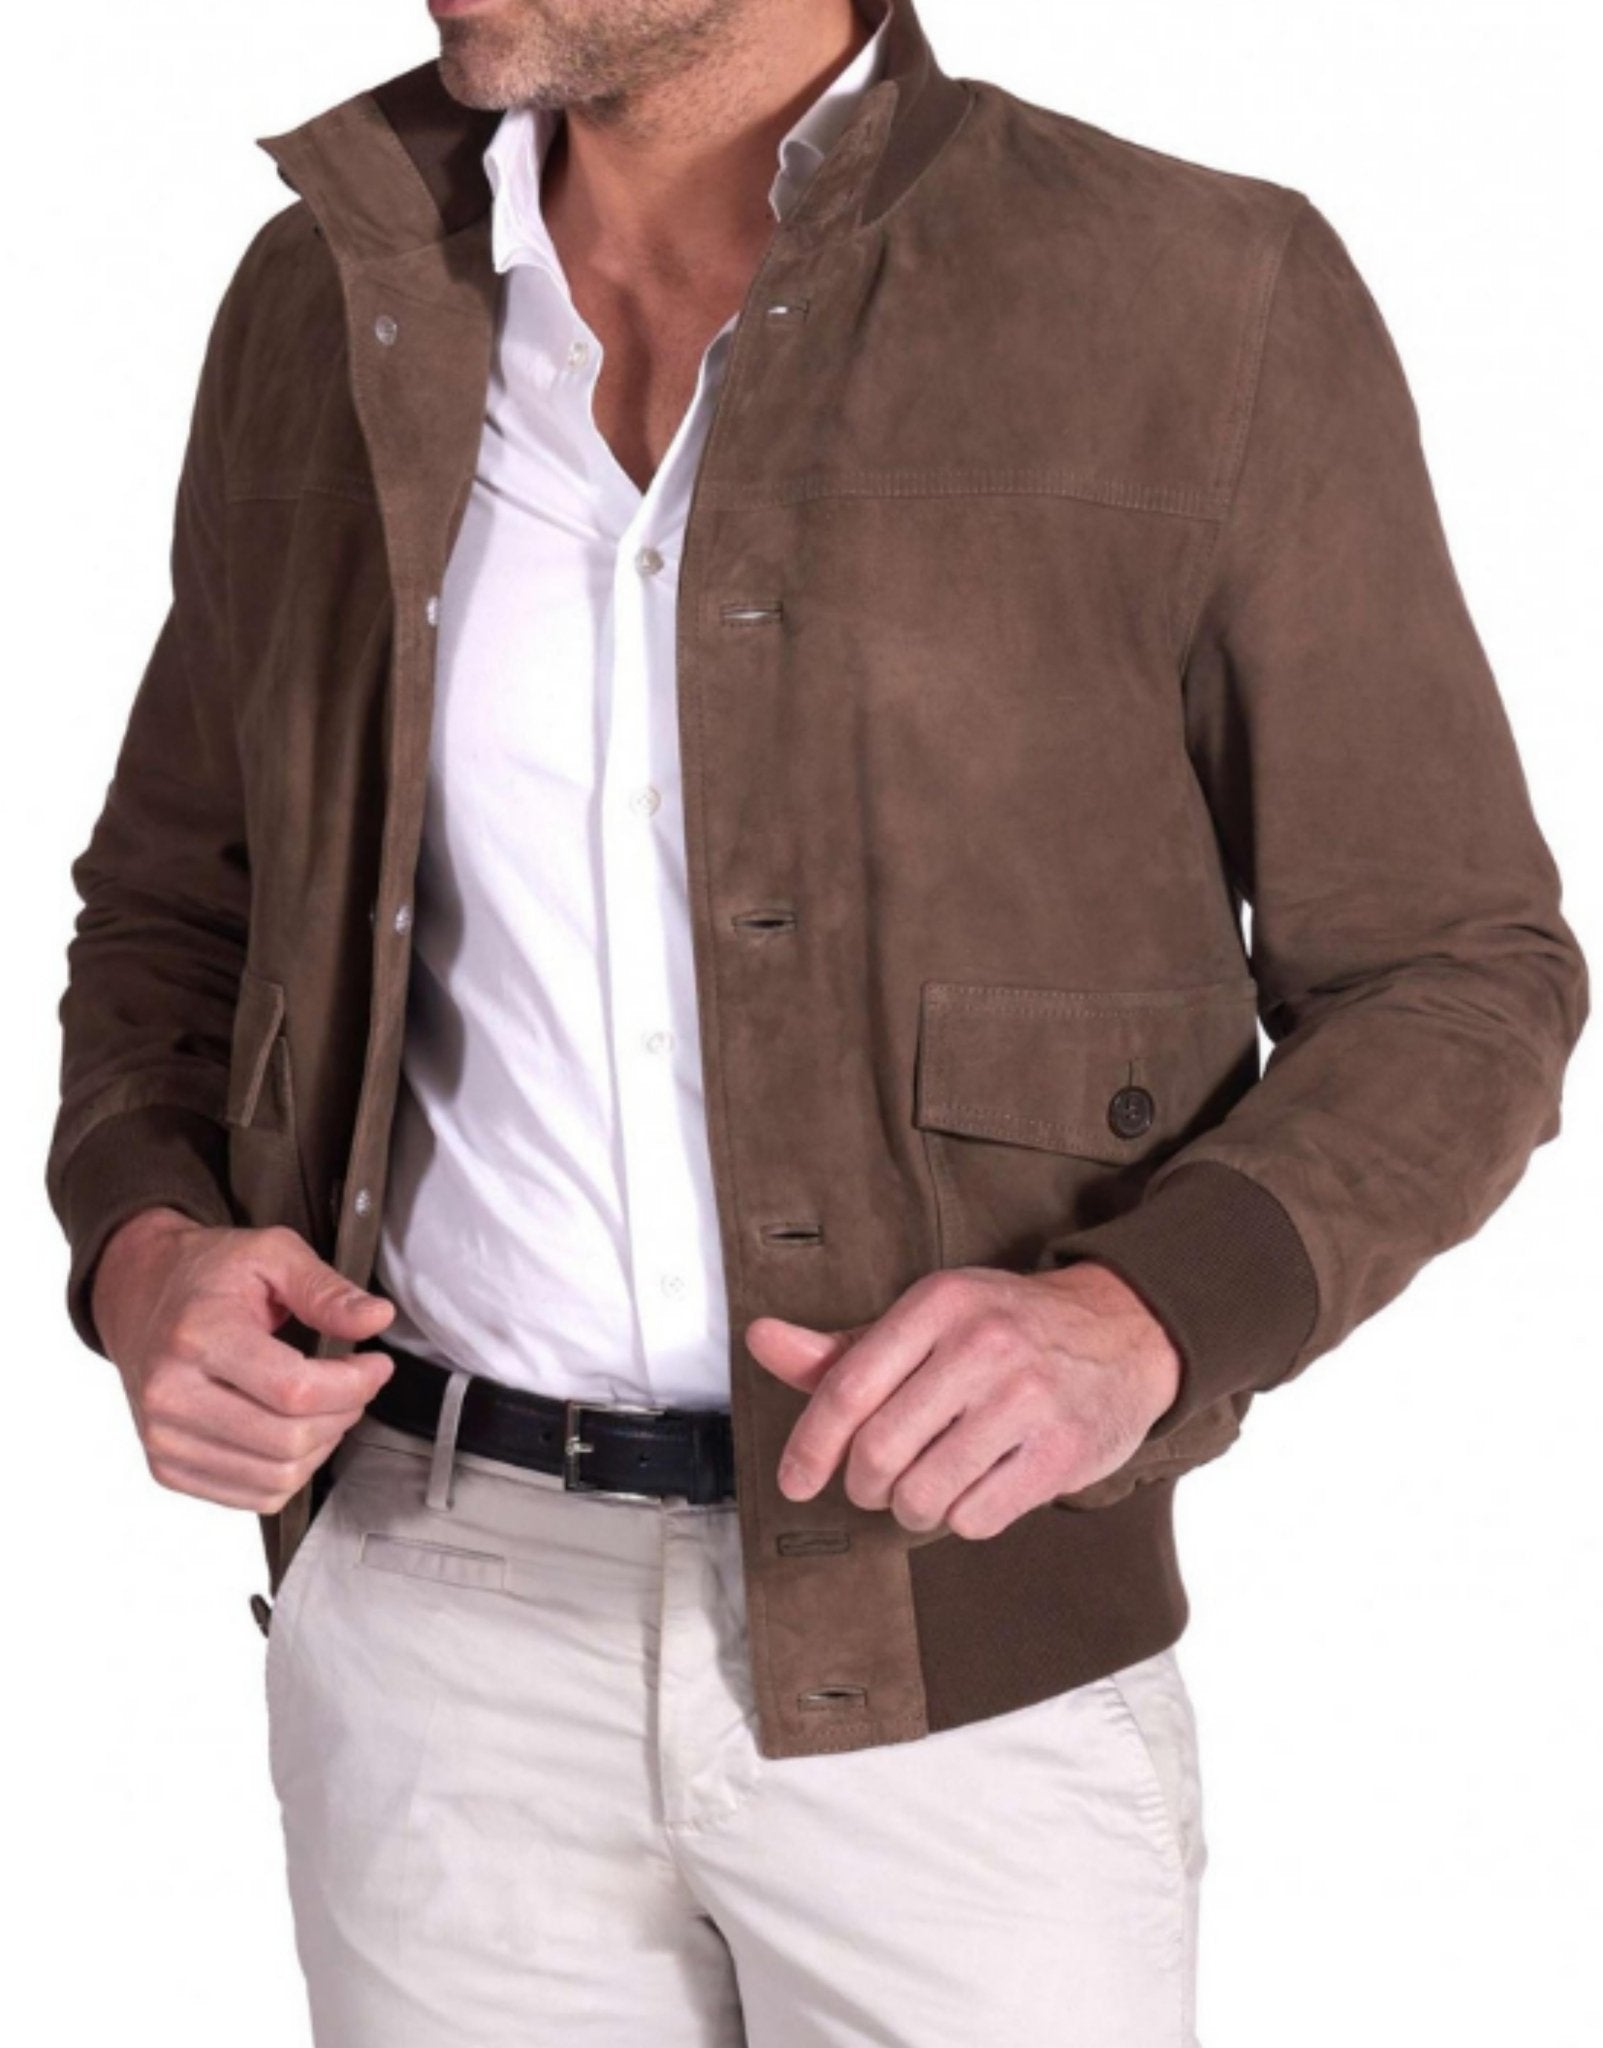 MCKINNON SUEDE LEATHER BUTTONED JACKET TAUPE - Henry BucksCasual Jackets38SS210003 - TAUP - R - 48